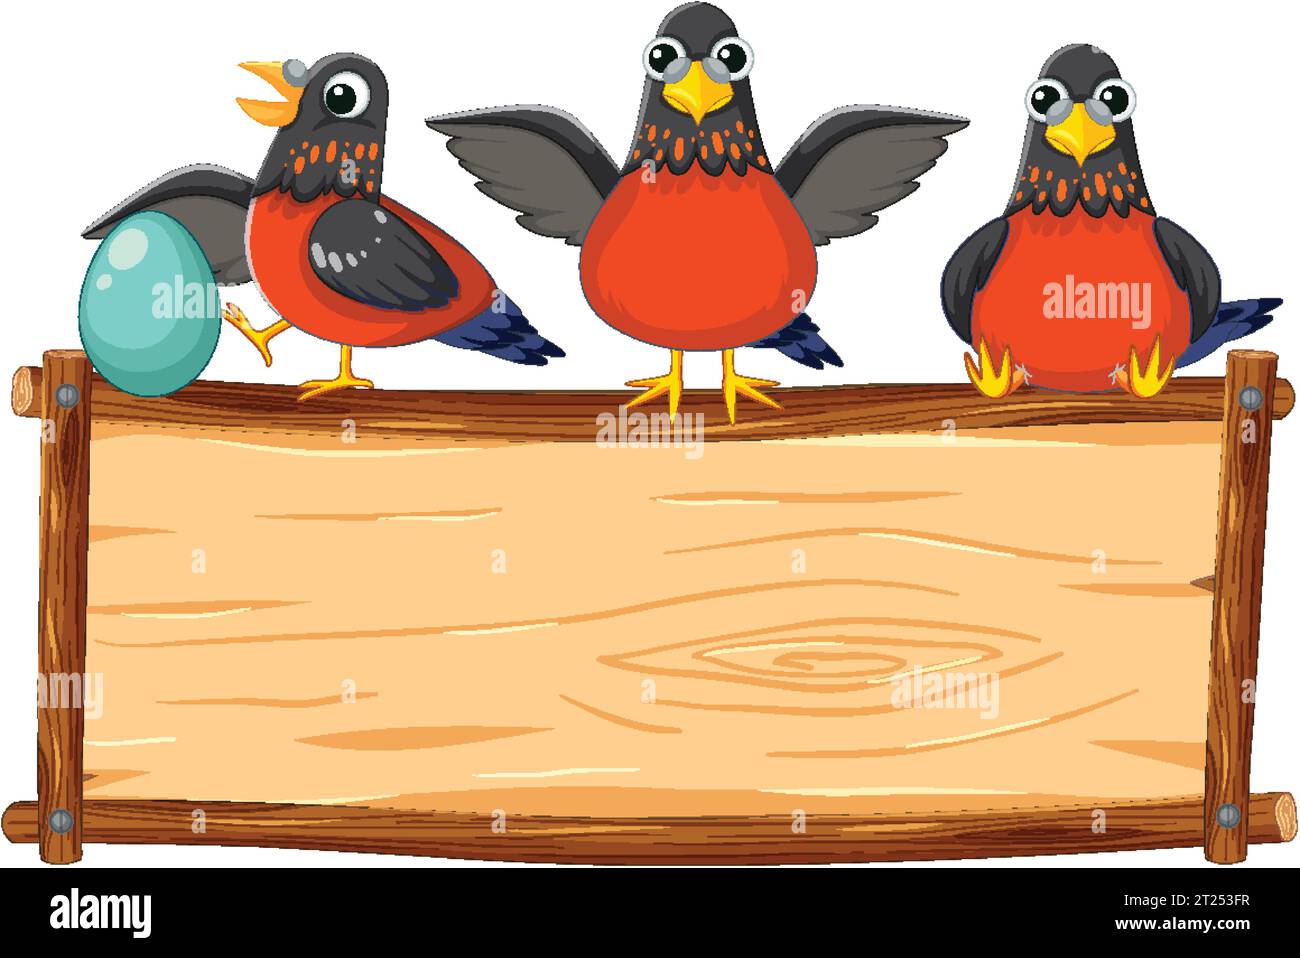 Colorful cartoon birds gathered around a wooden board banner Stock Vector